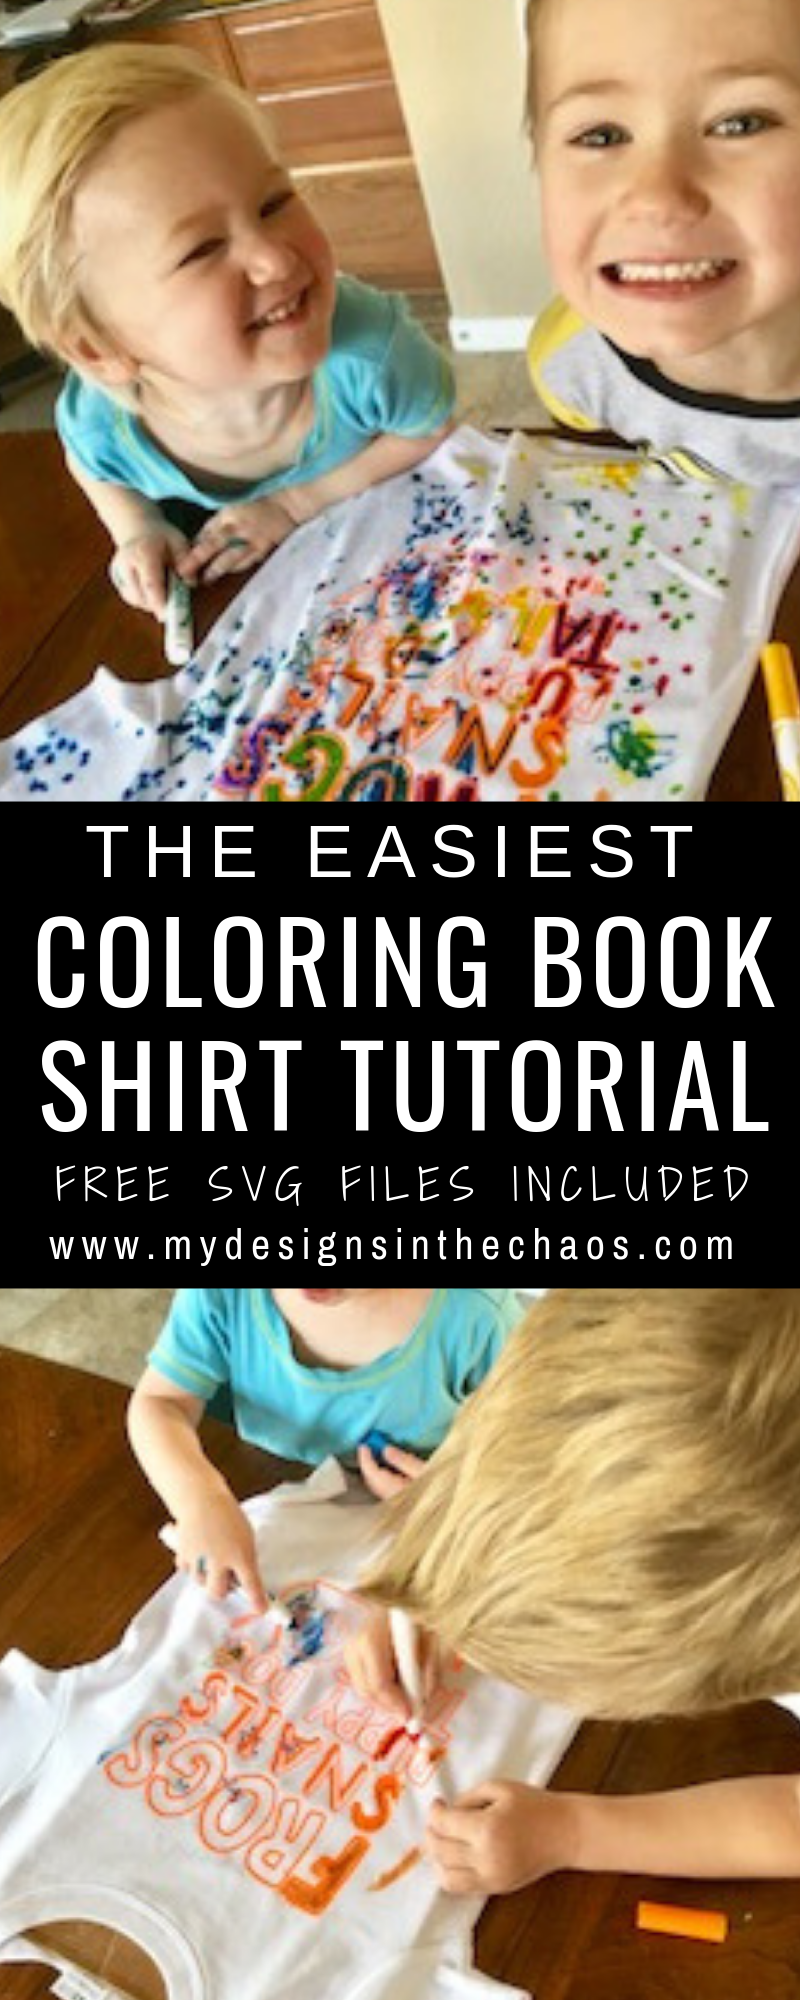 Diy Coloring Book Shirt Tutorial My Designs In The Chaos